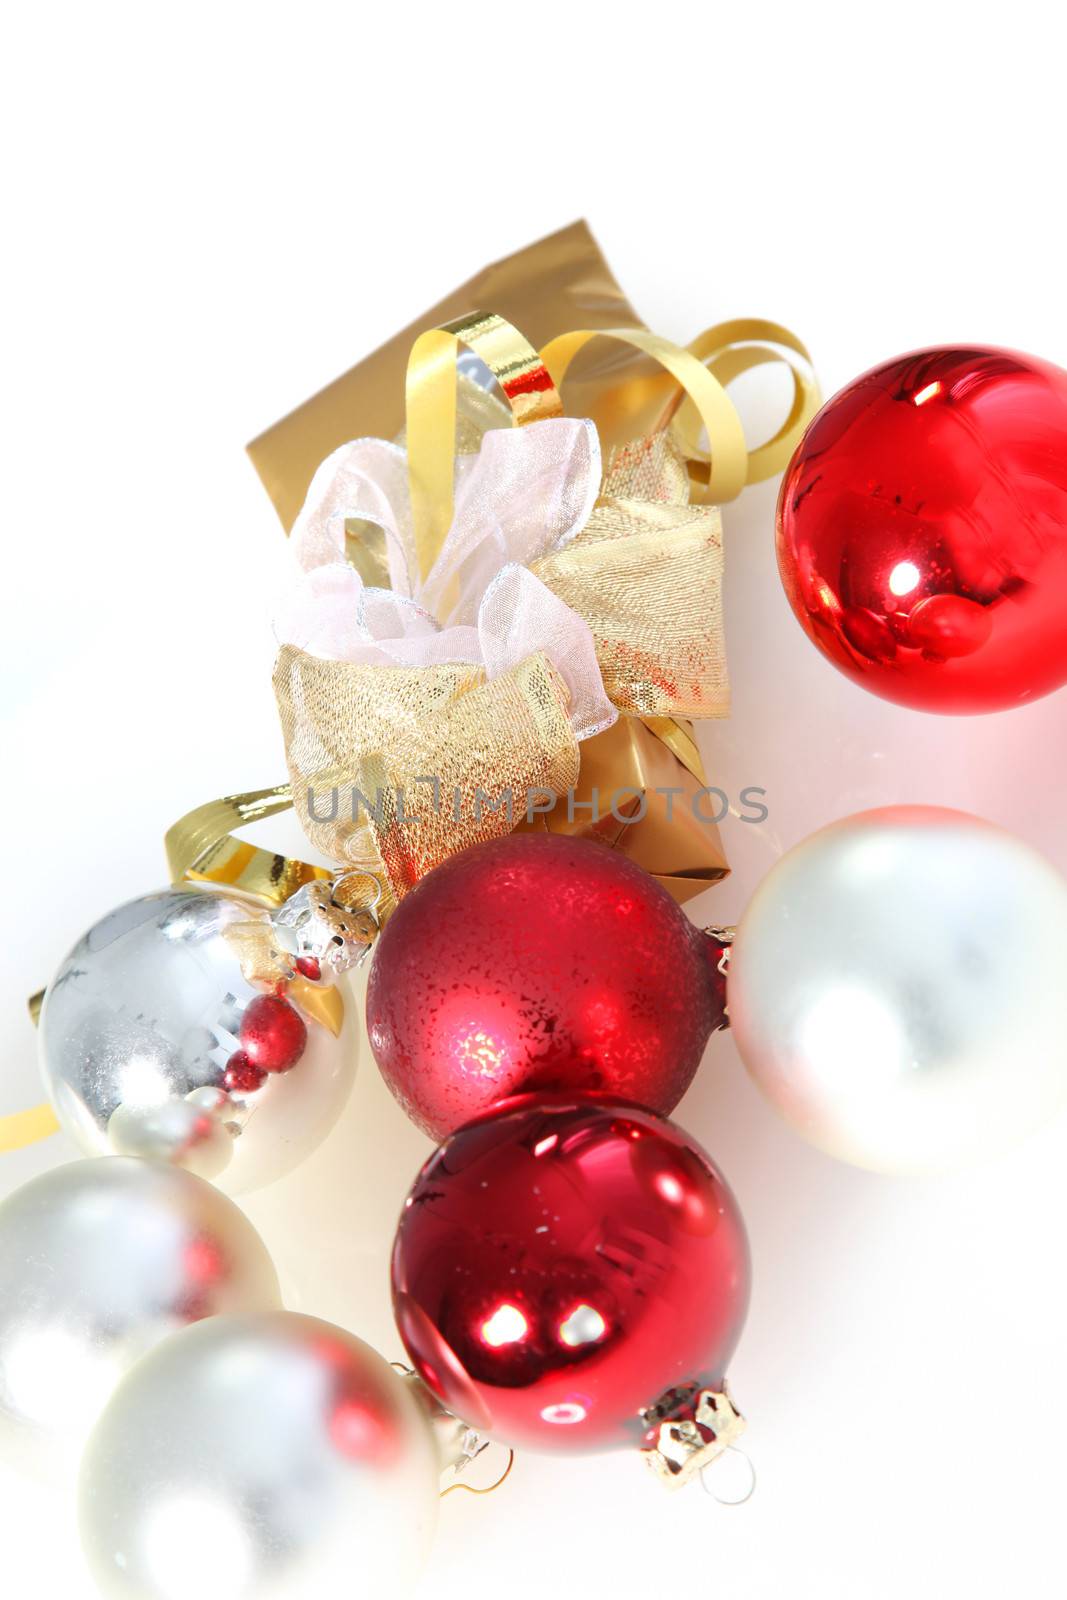 Decorative gold Christmas gift with and ornamental ribbon amongst scattered red and white baubles for a colourful seasonal background with copyspace for your xmas wishes